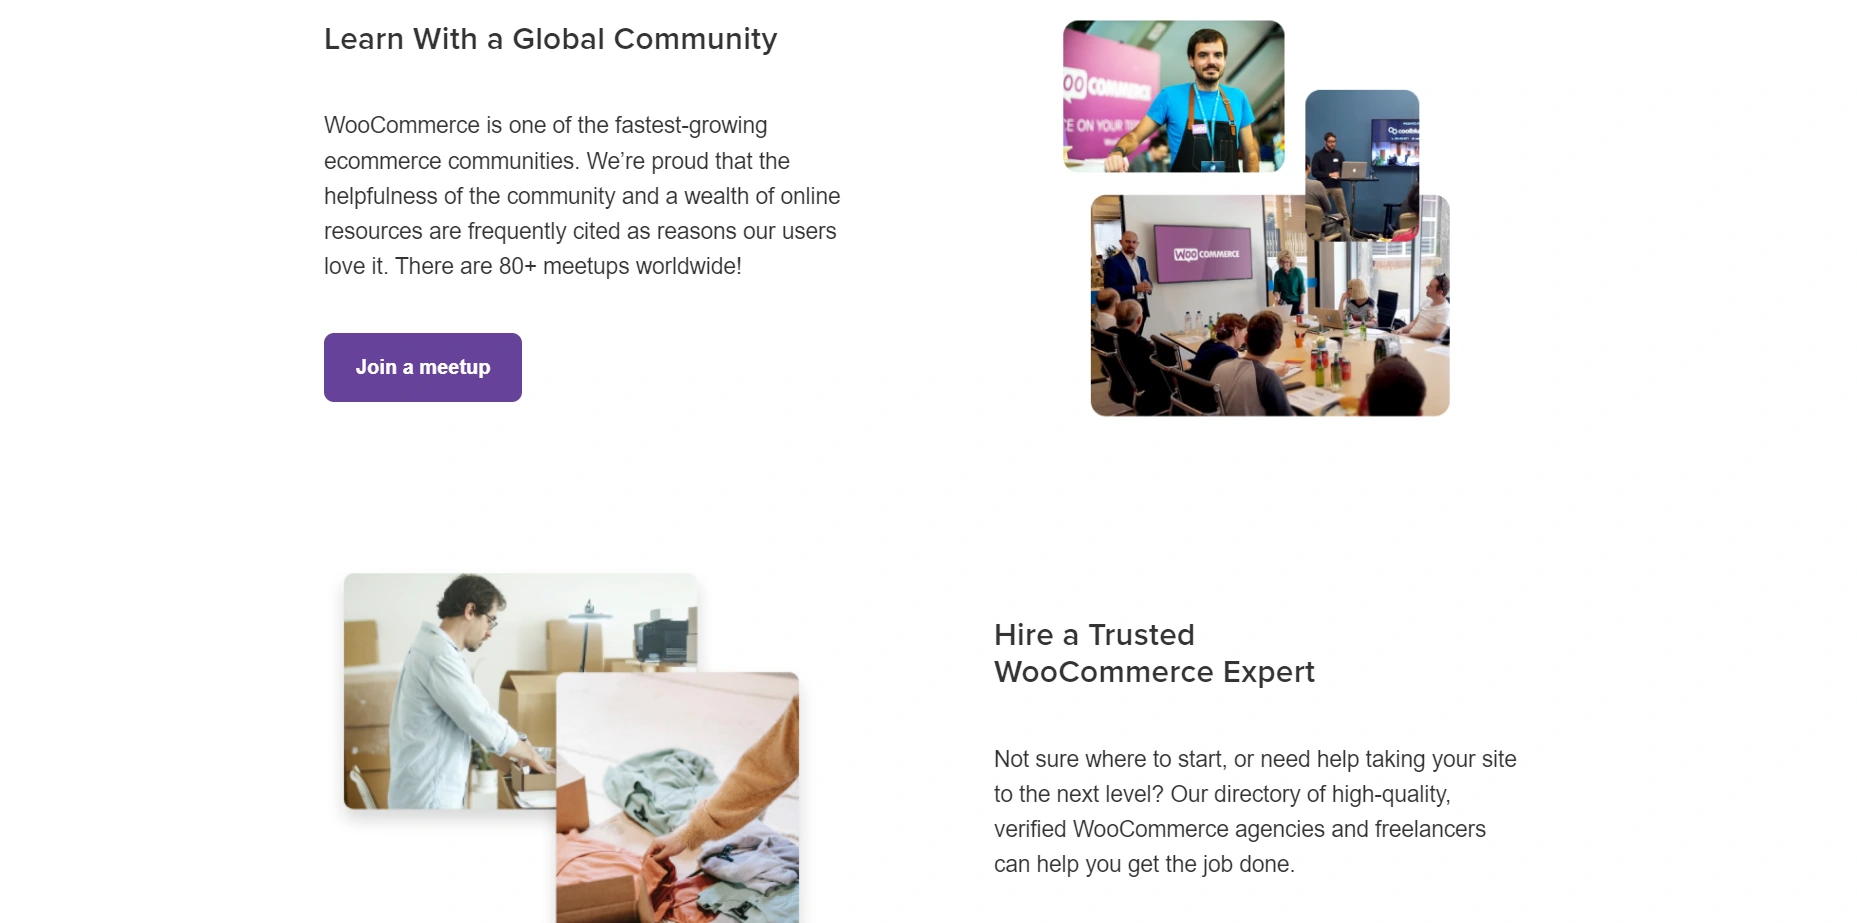 Offer Professional Services on WooCommerce